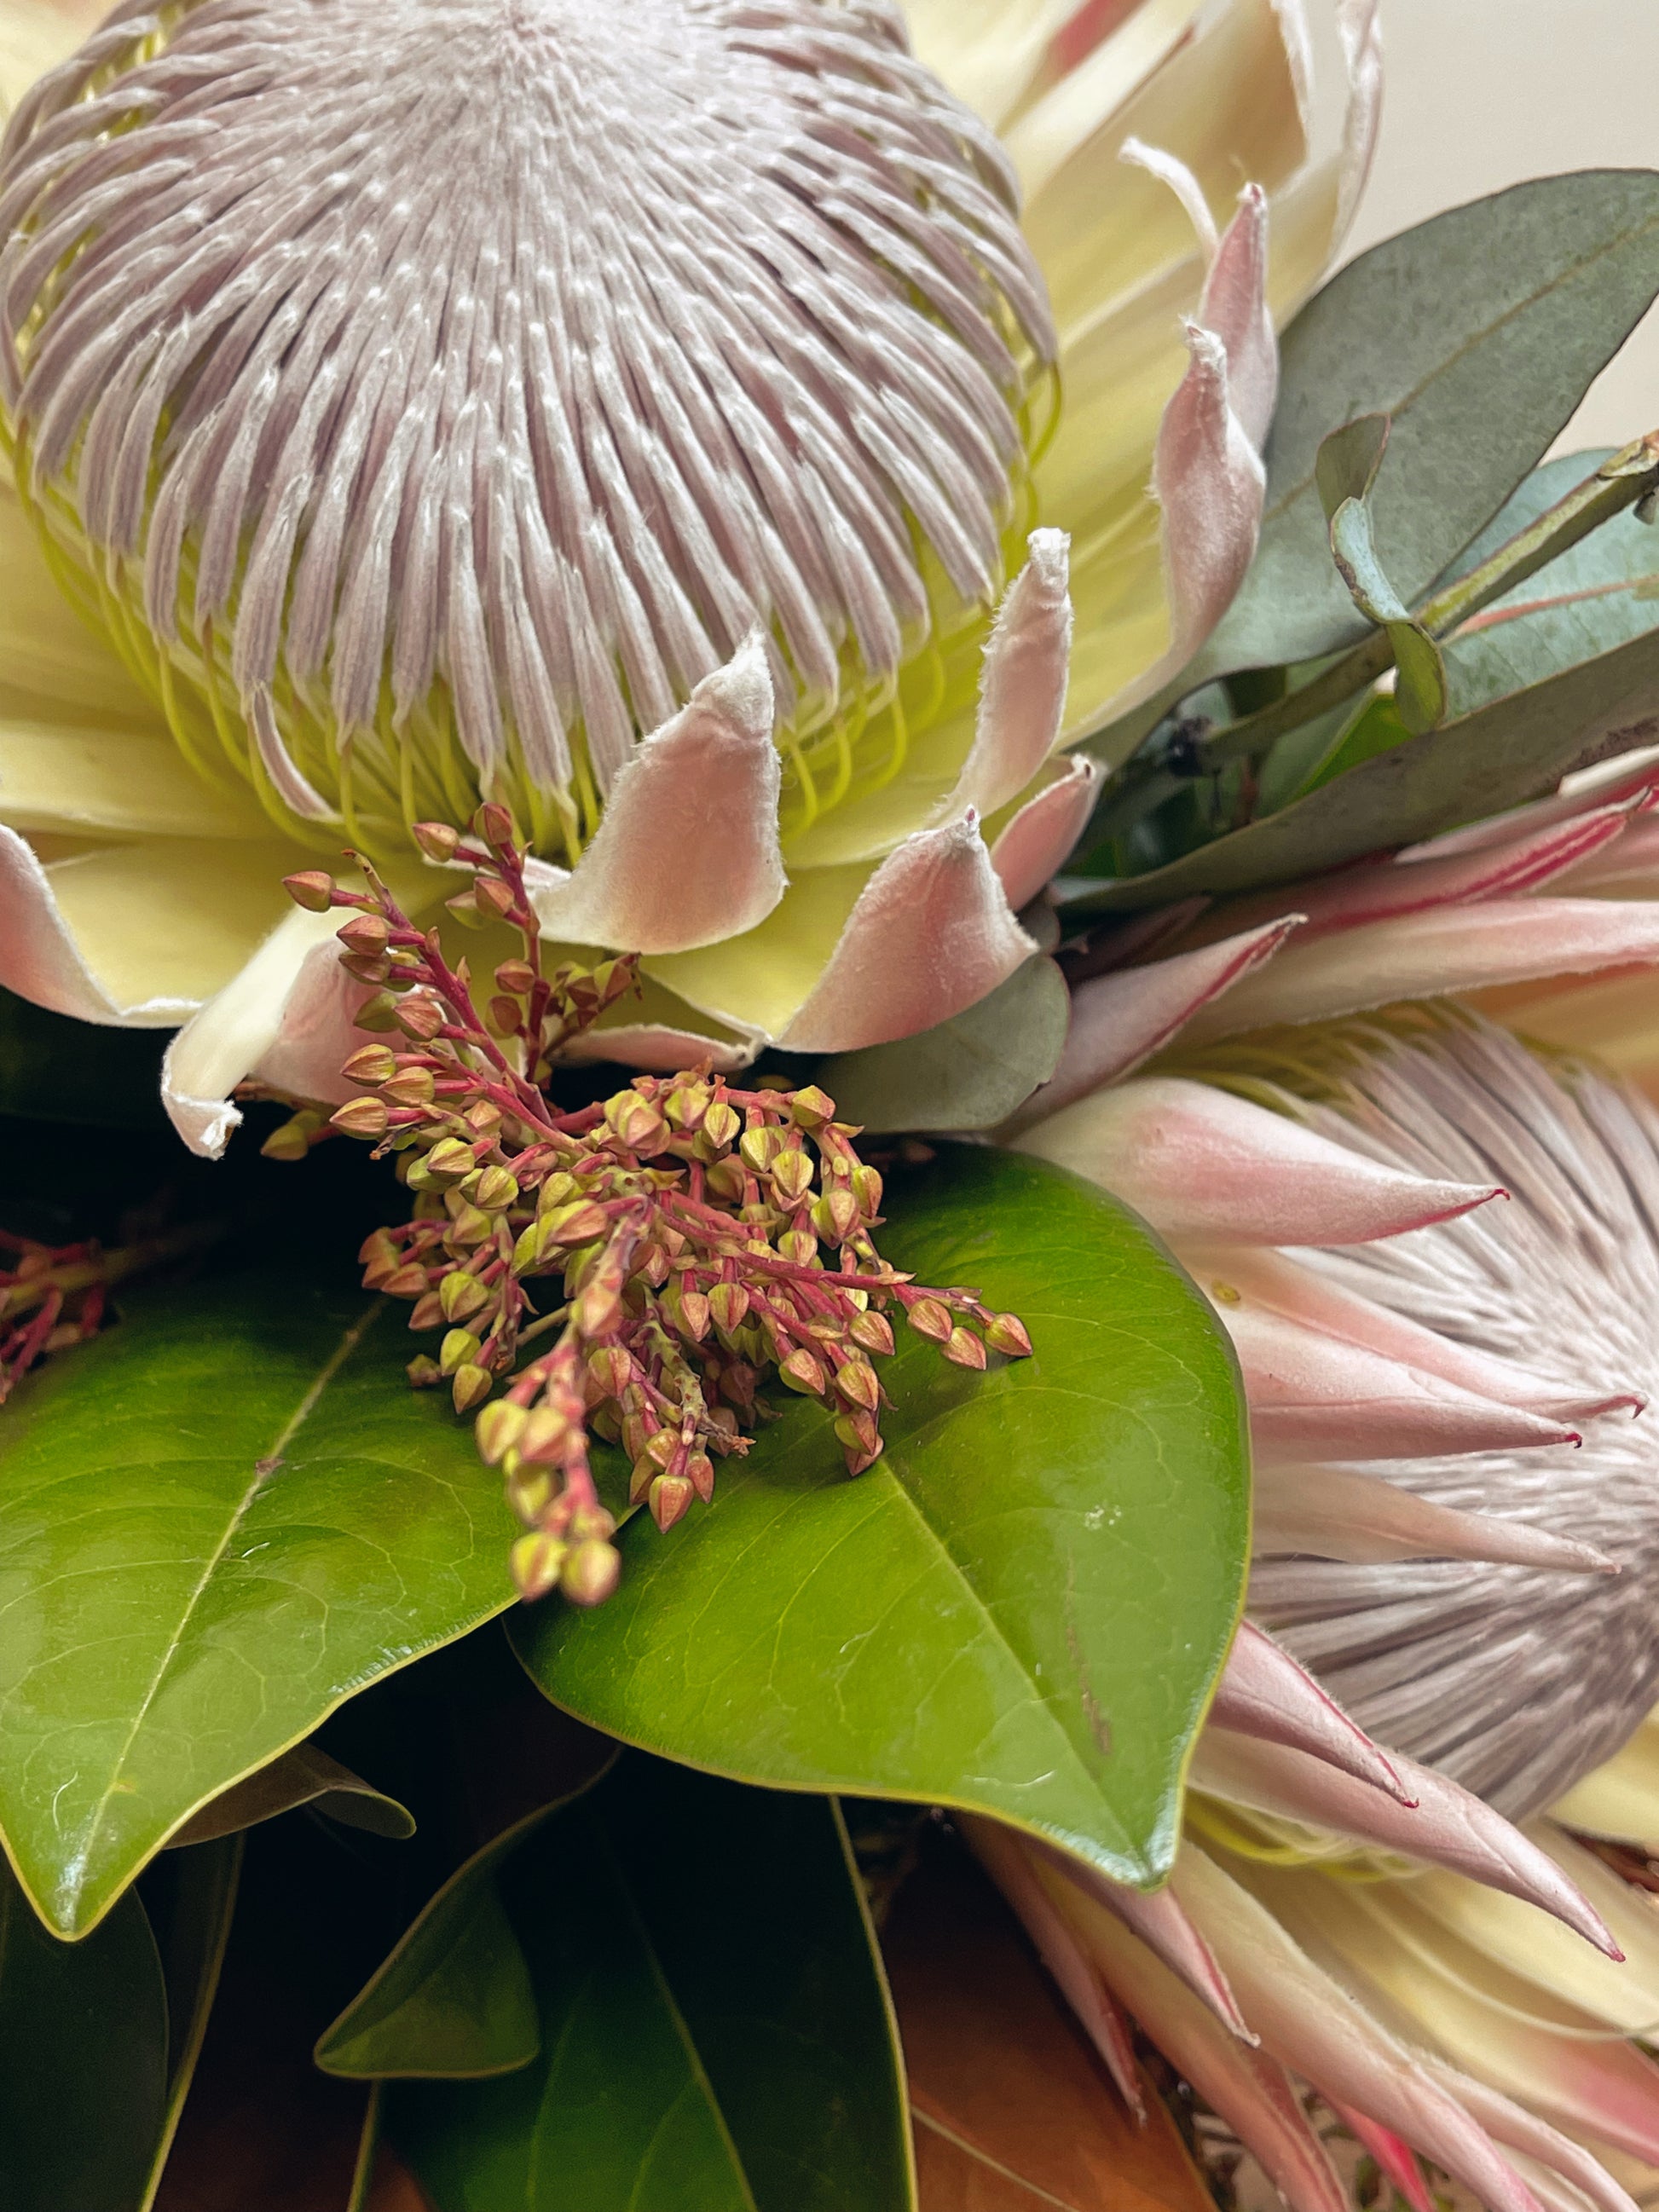 Flowersect, Floral, Bouquet, Flowers, Gifts, Posy, Posey, Wellington, Lower Hutt, Upper Hutt, Petone, Eastbourne, Bright, Pastel, Florist, Florists, Creative, Flair, custom, bespoke, bunch, bunches, scent, protea